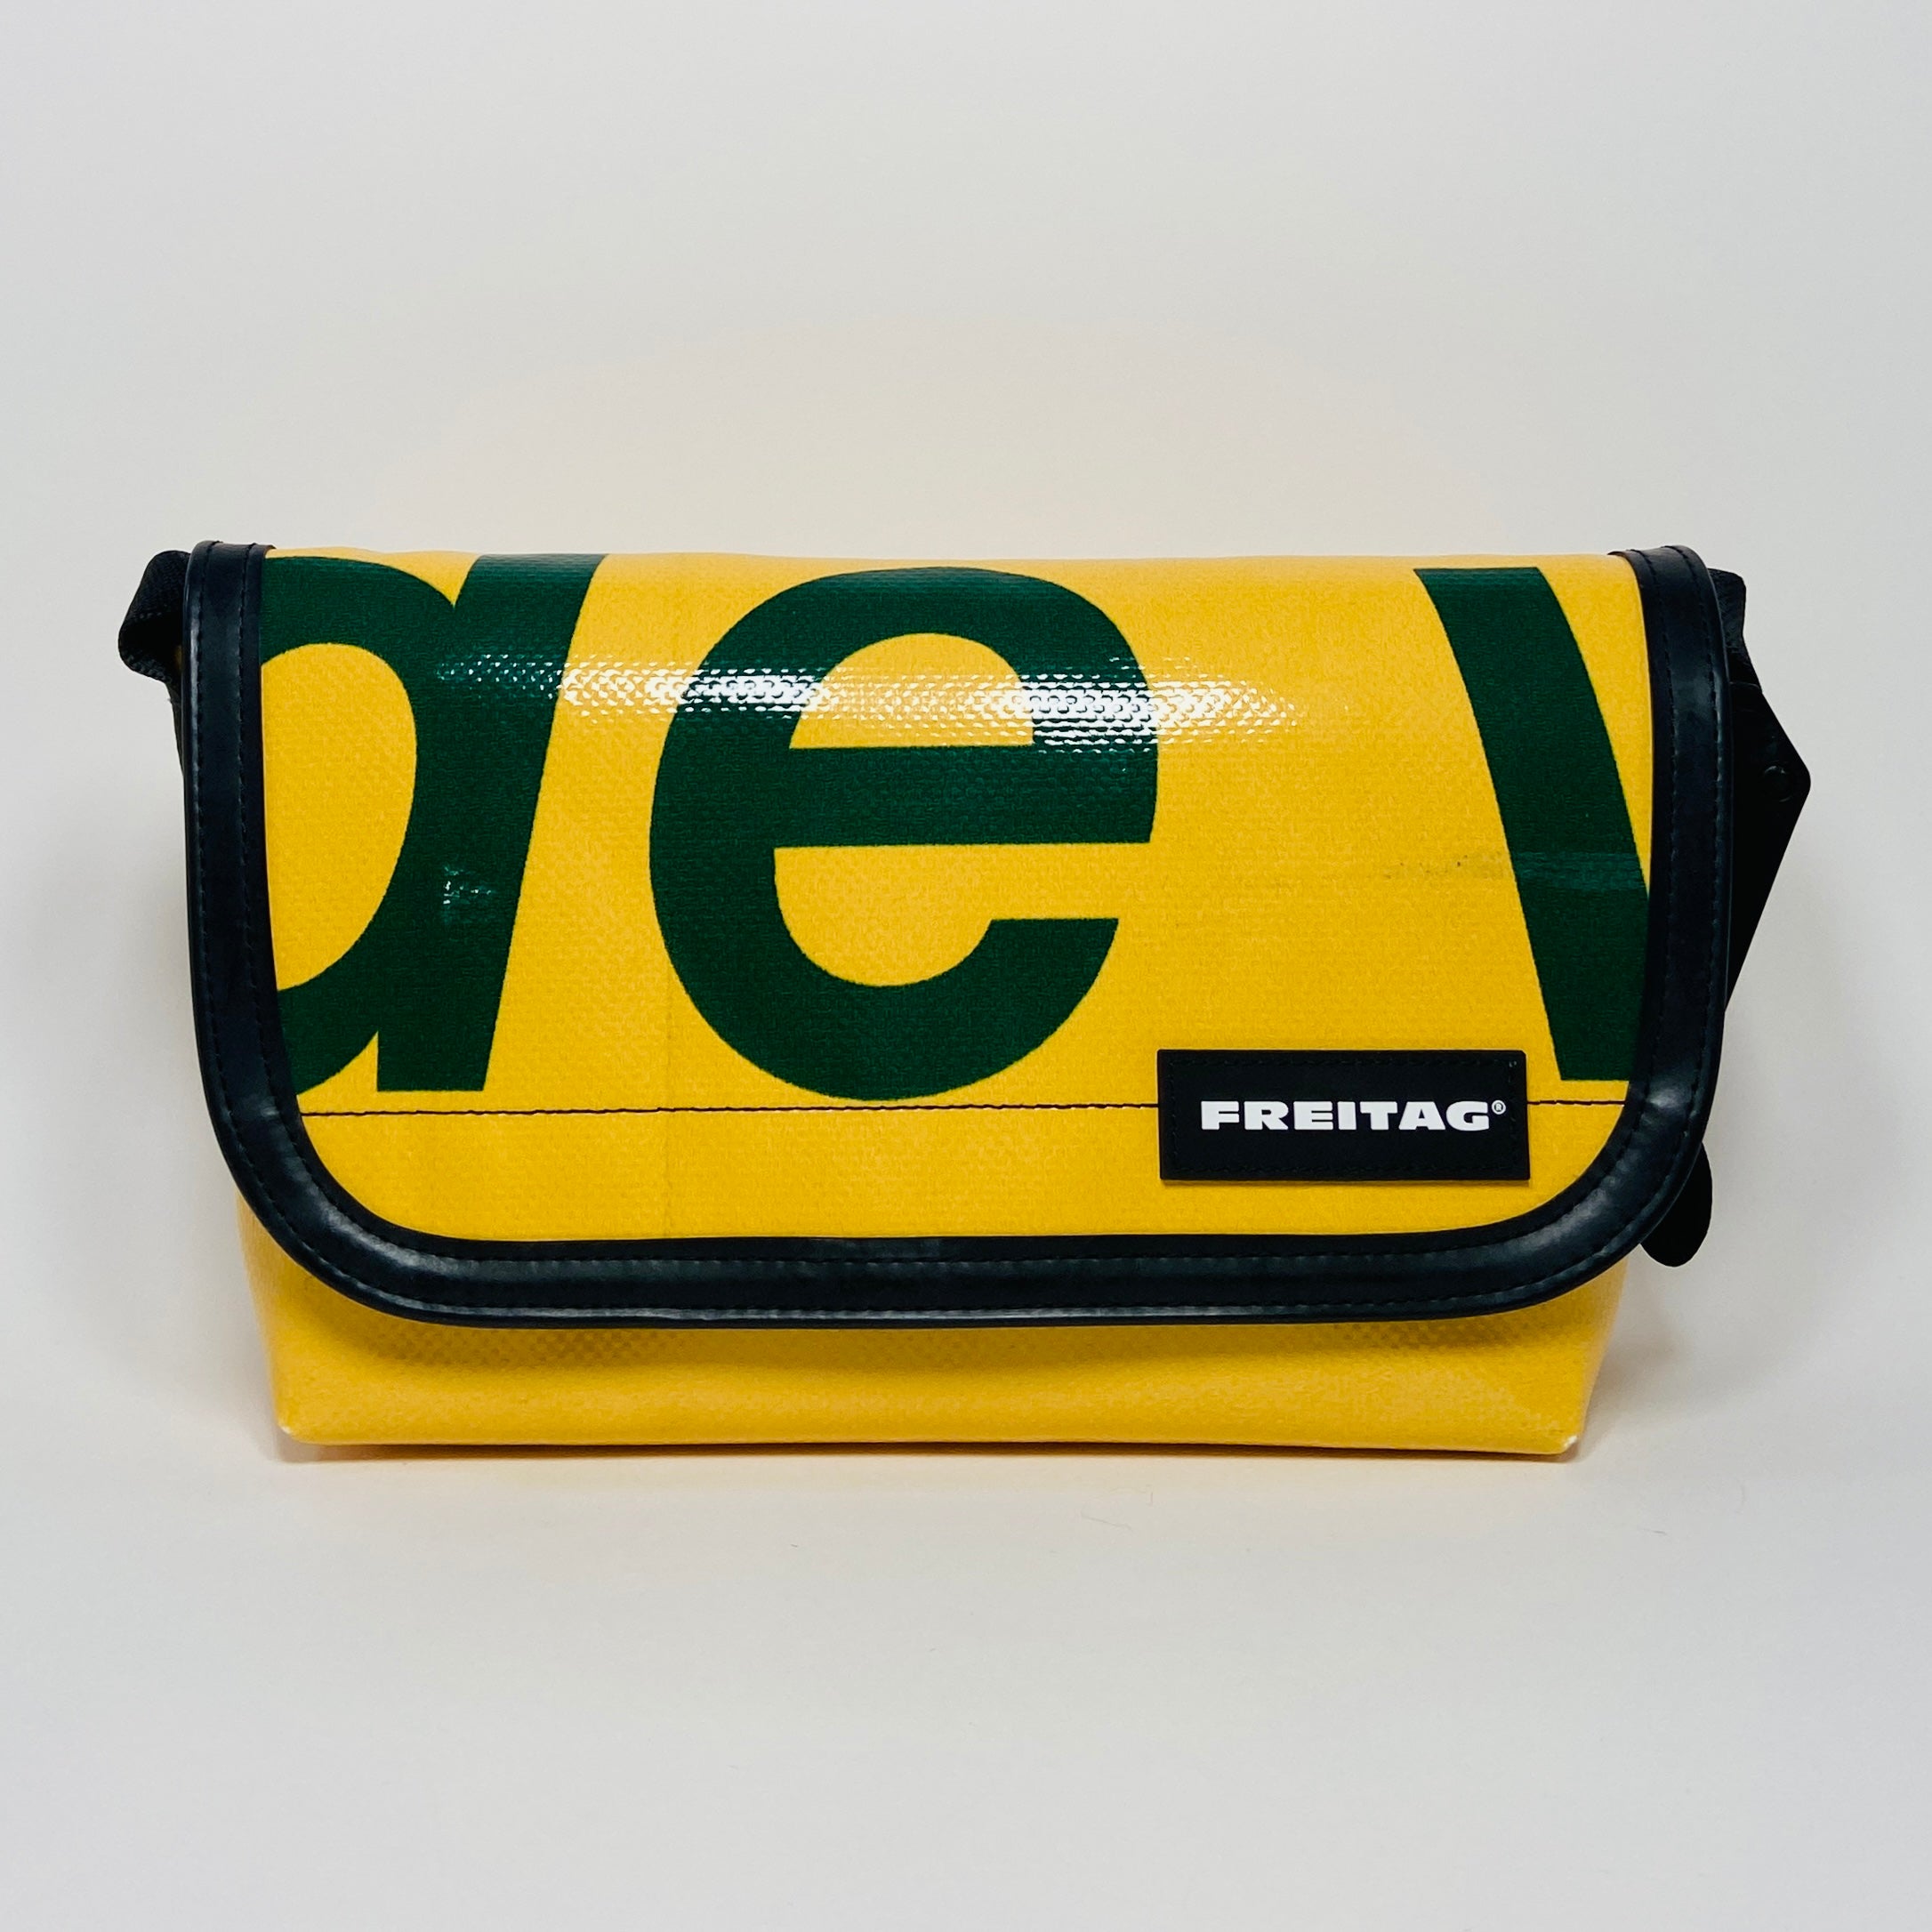 FREITAG F41 - Hawaii Five-0 - Yellow with Green Typography | UNITOM